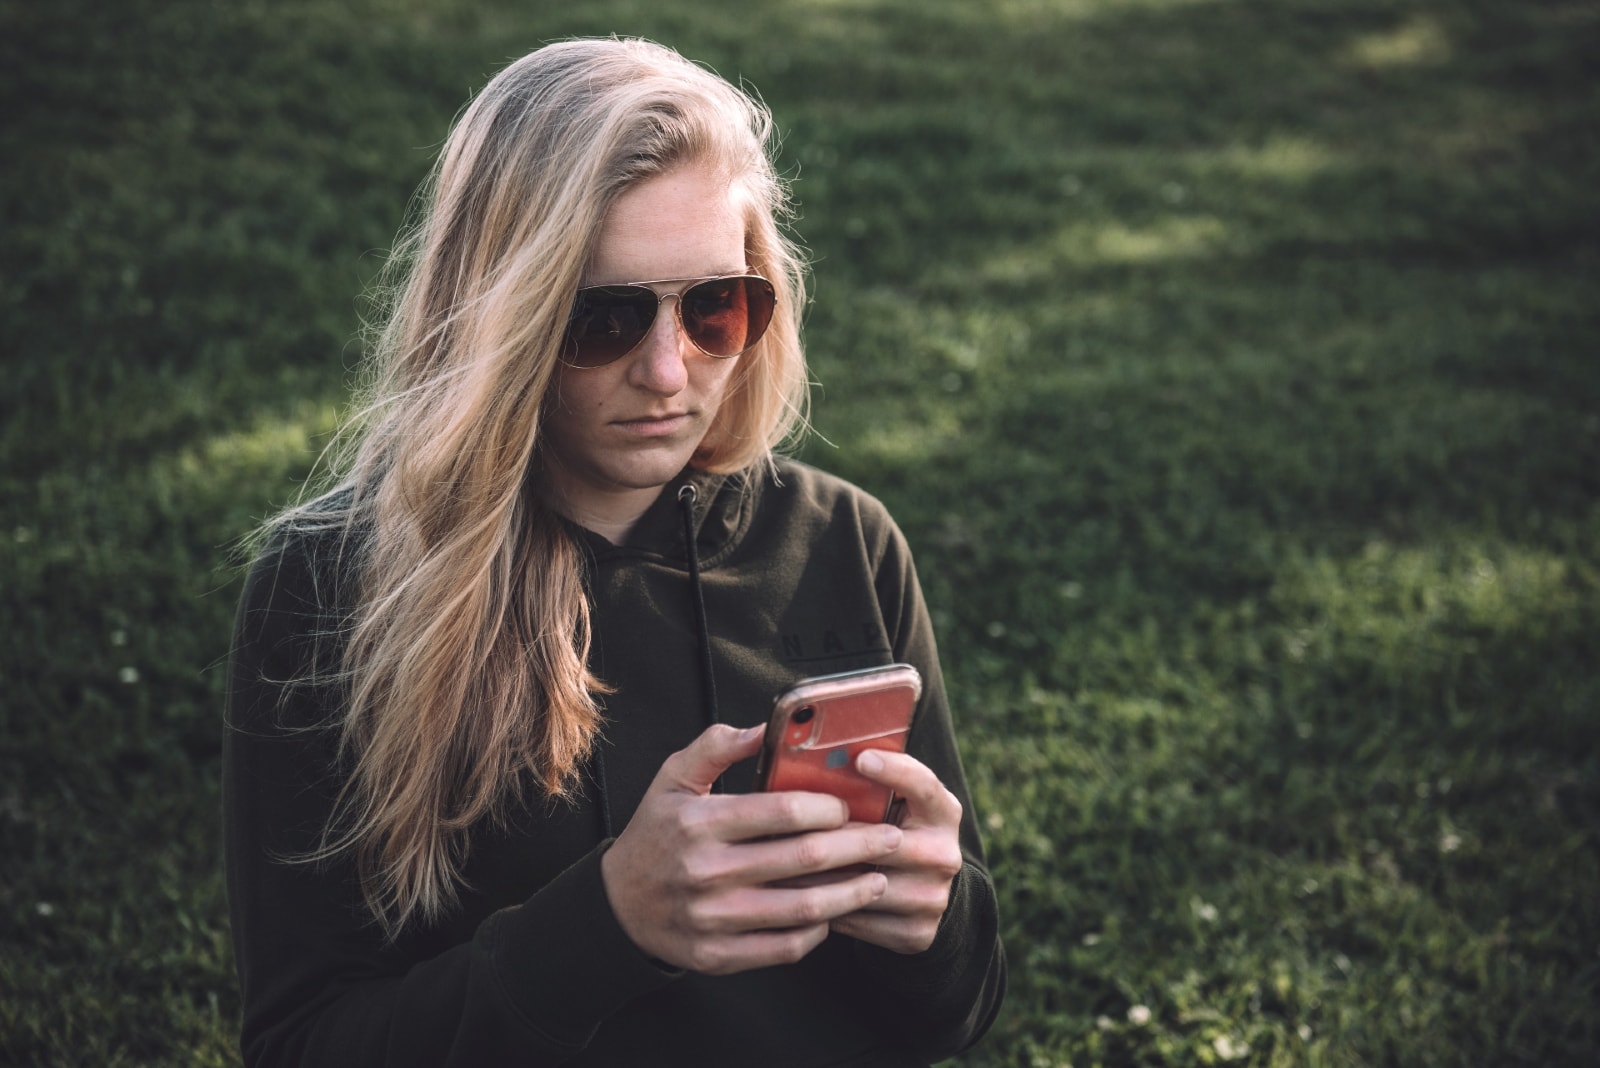 blonde woman with sunglasses using smartphone outdoor